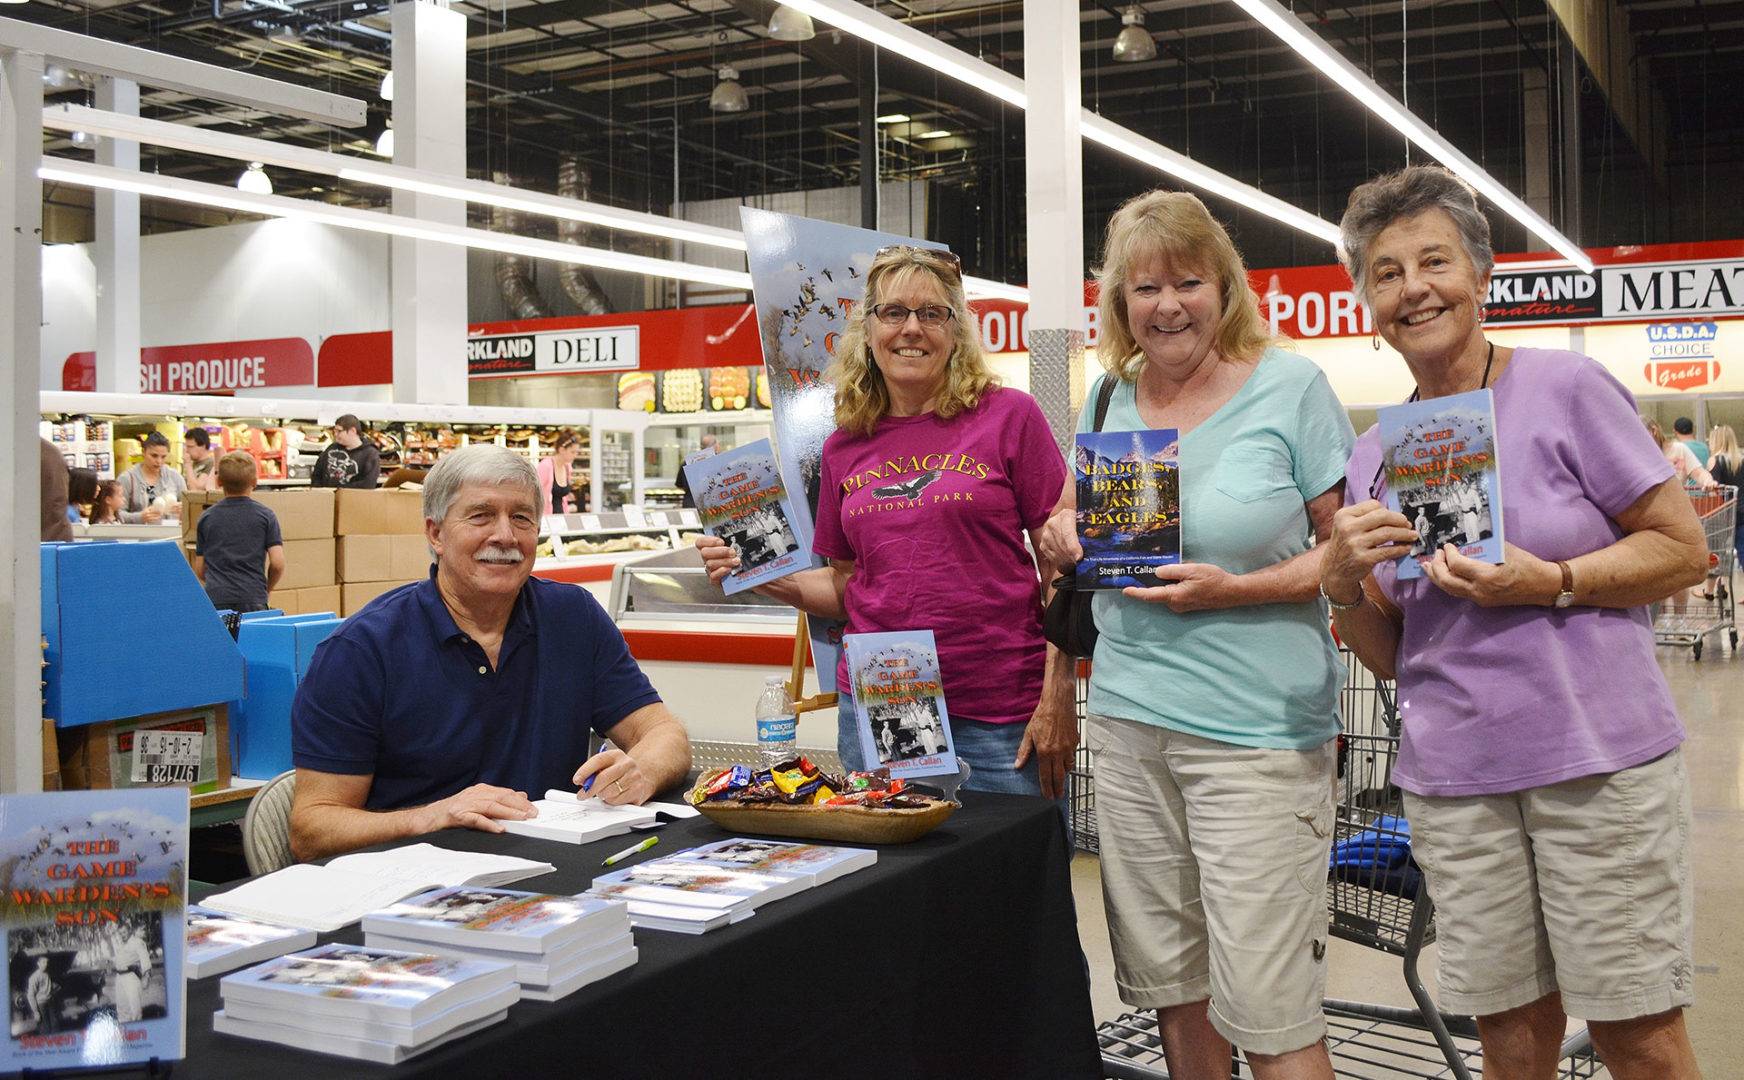 A book signing with Author Steven T. Callan